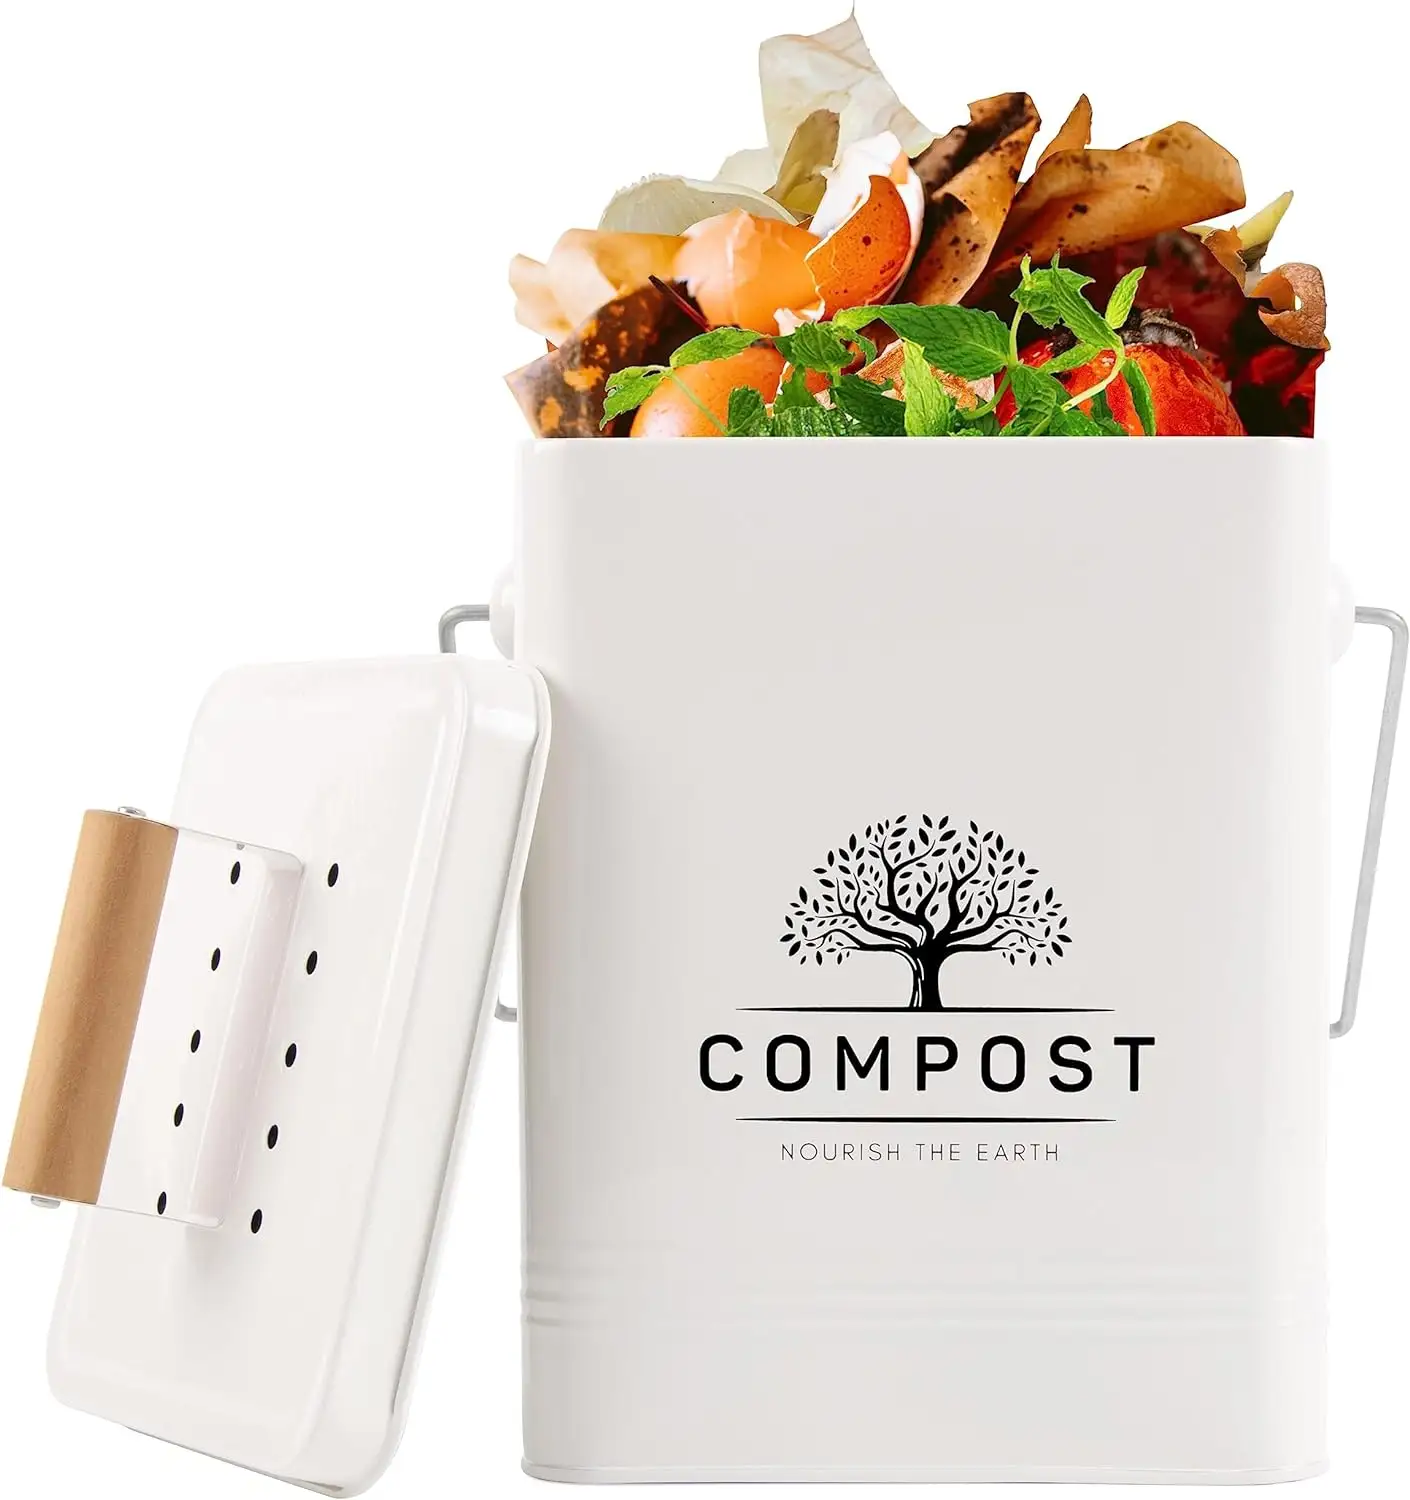 1.7 Gallon 6L Compostable Food Scrap Bin Rectangle Metal Composter Bin With Charcoal Filter Lid and Wood Handle